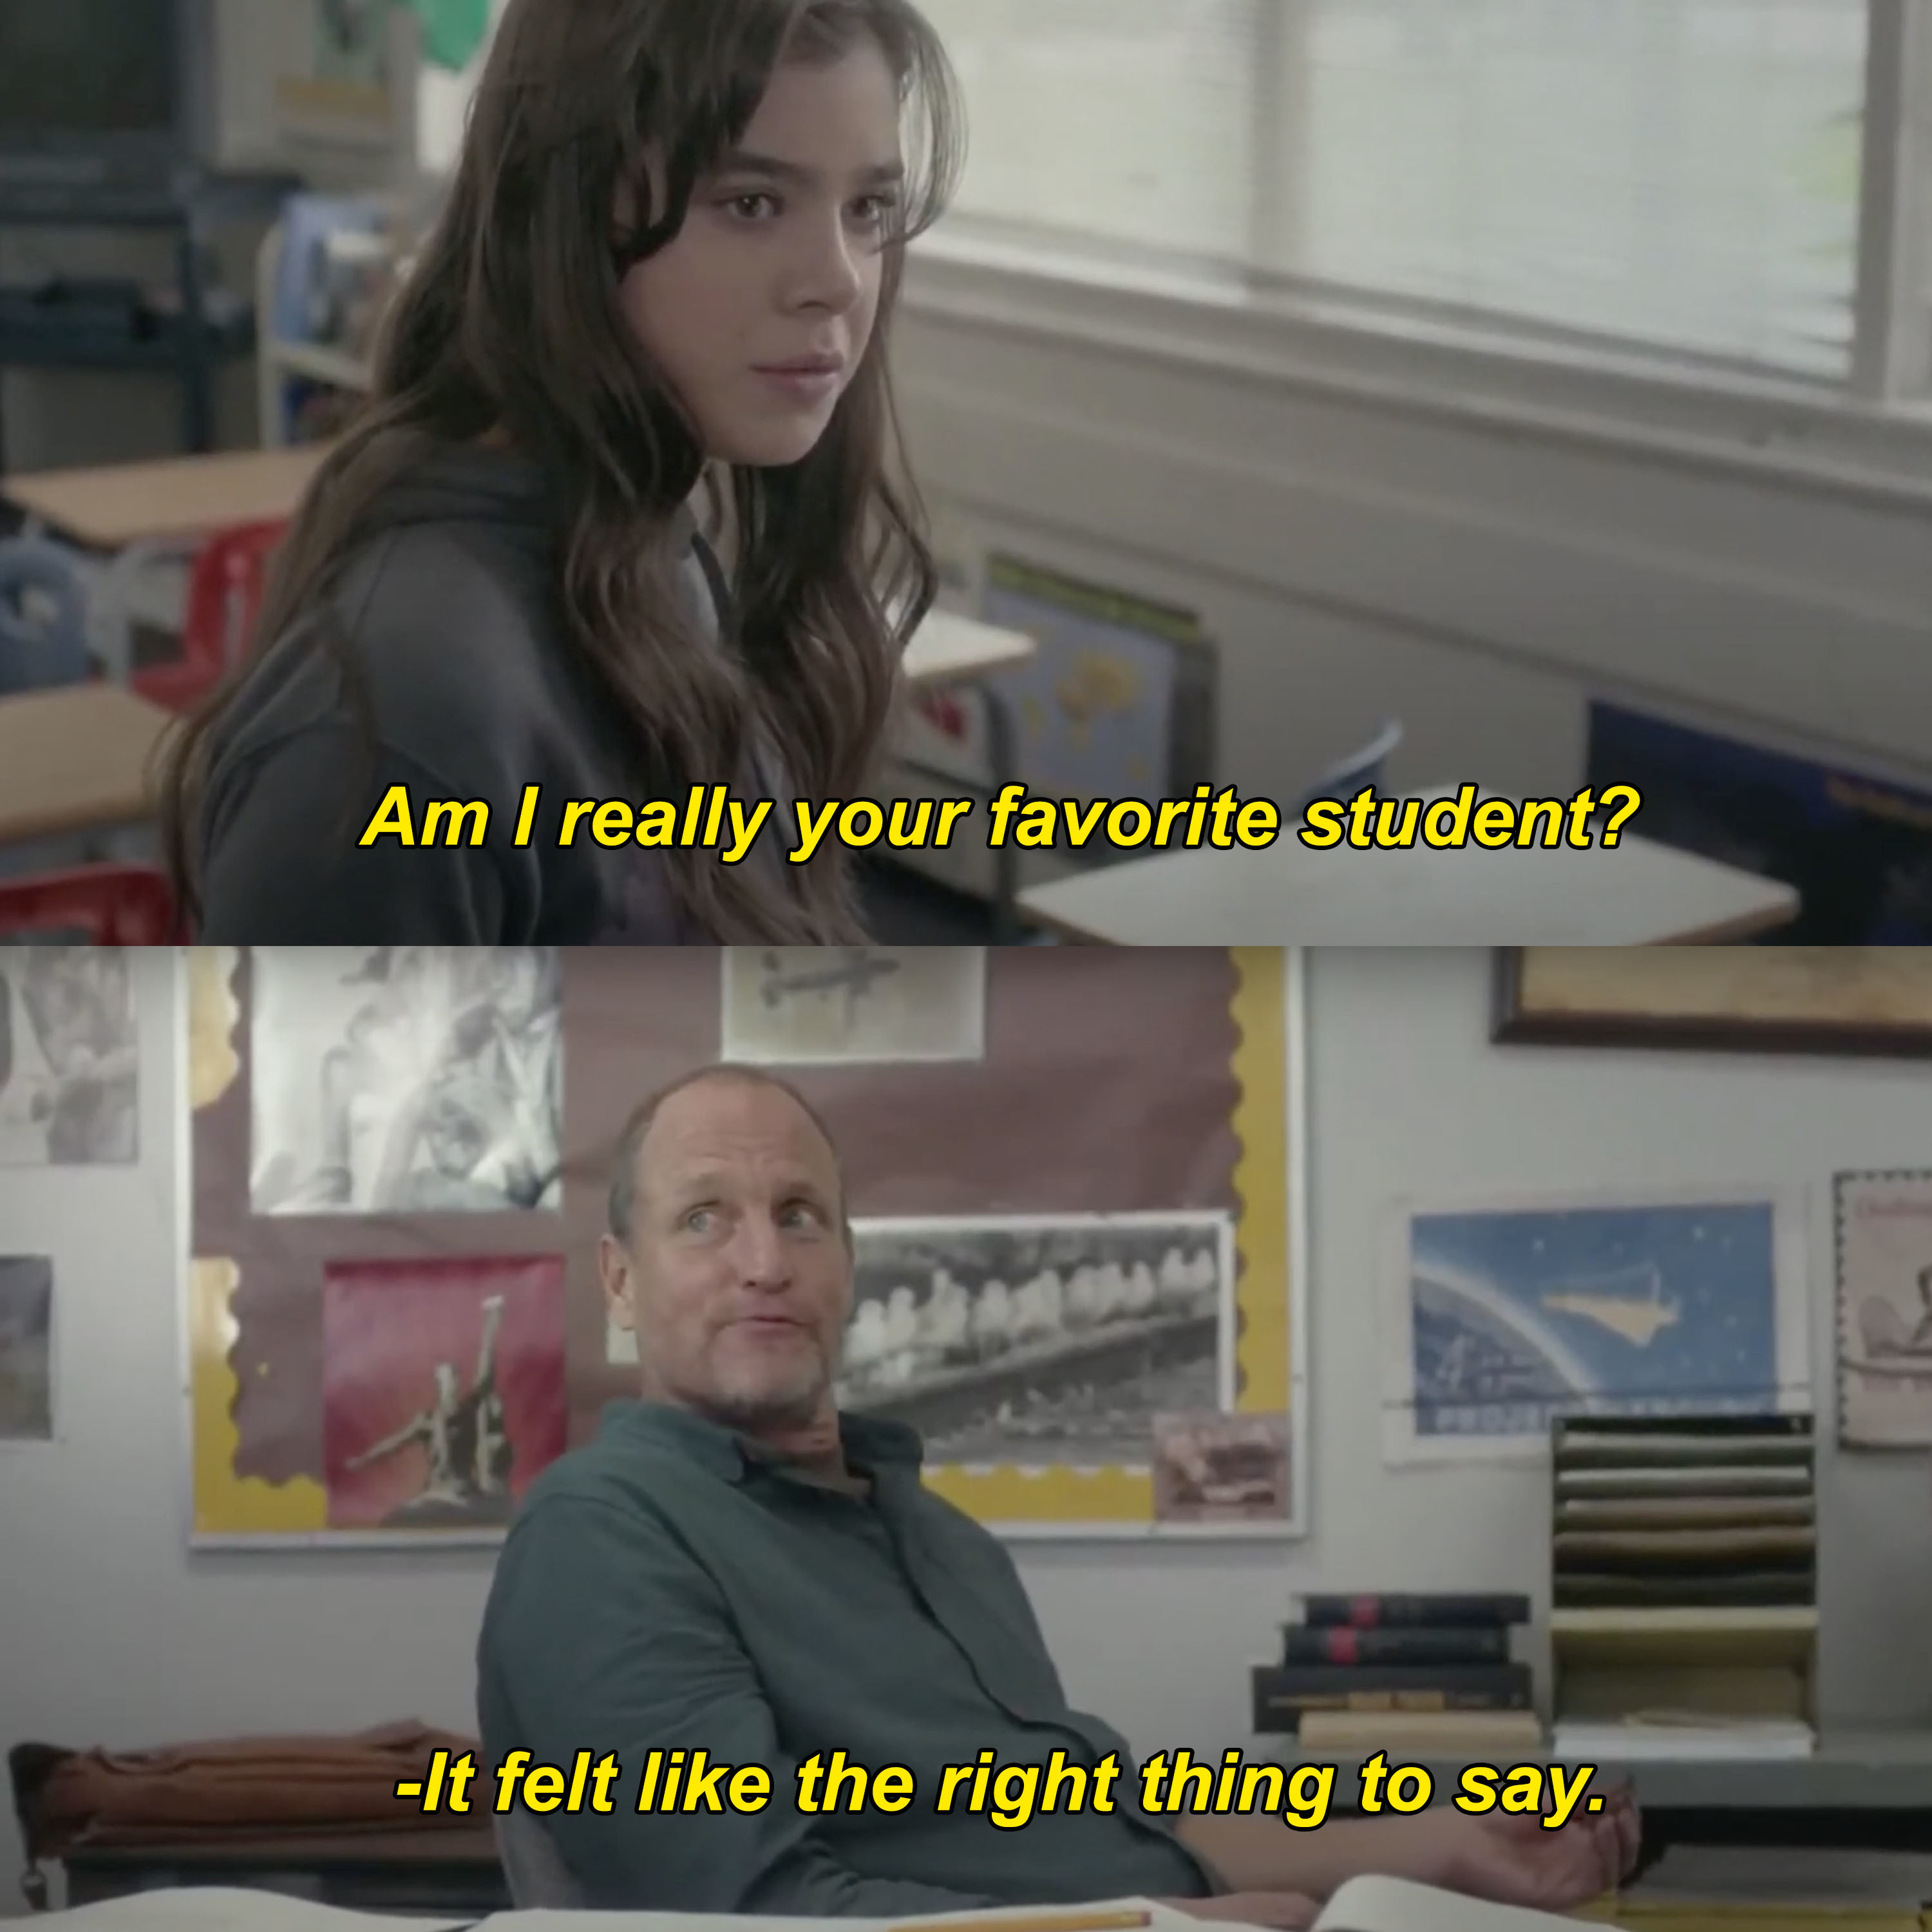 Hailee Steinfield as Nadine and Woody Harrelson as her teacher Mr. Bruner have a bonding moment during their lunch period